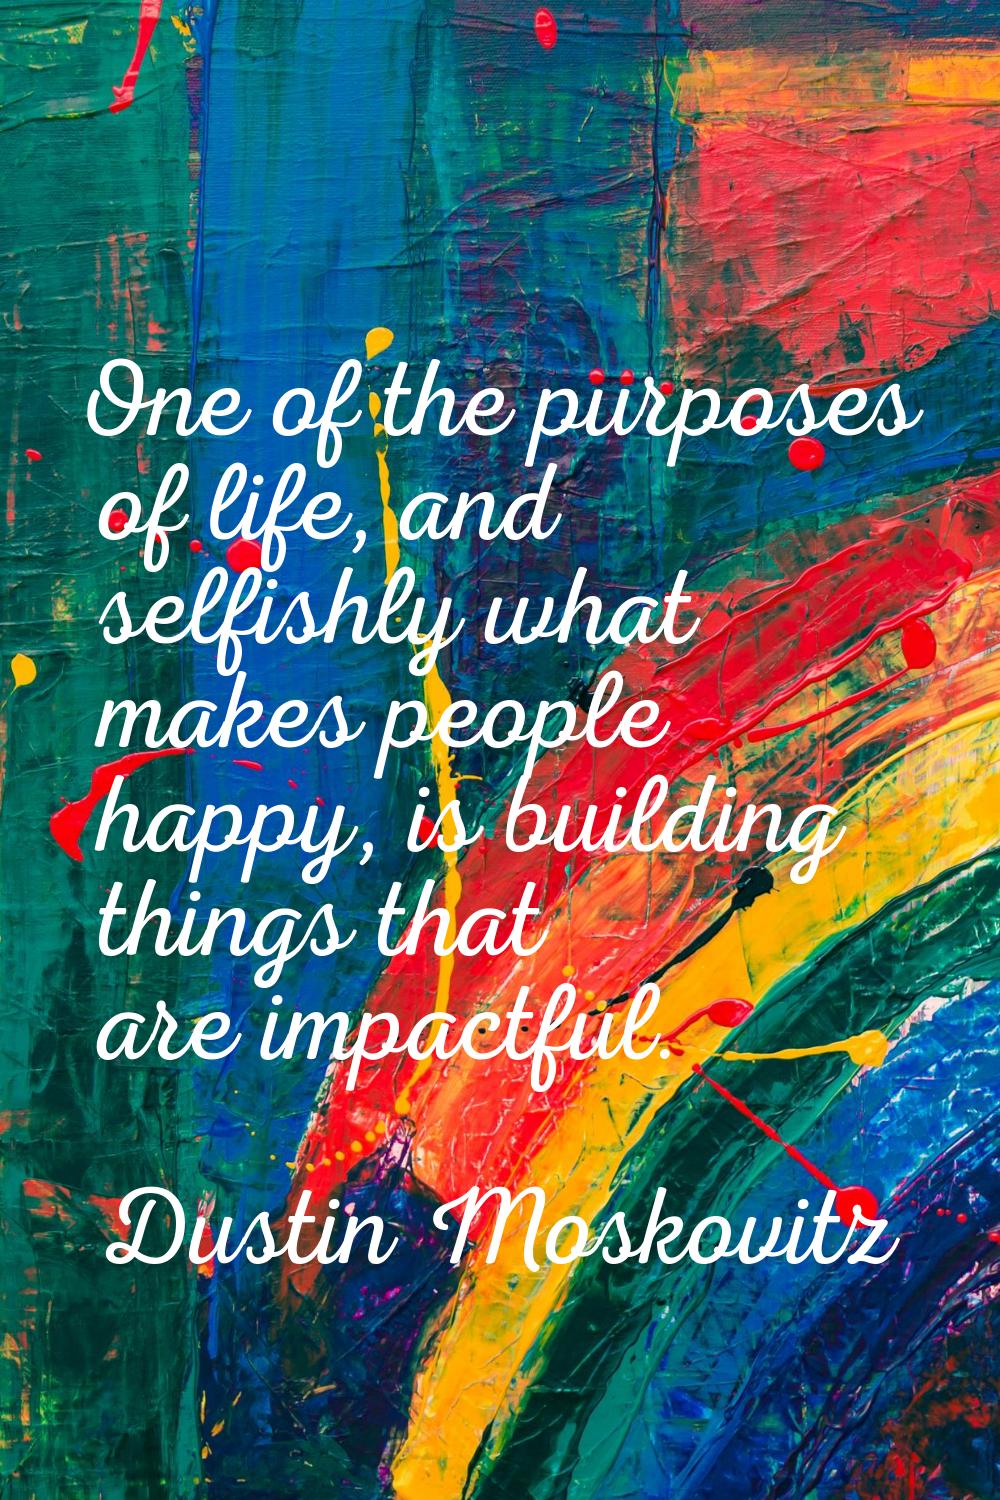 One of the purposes of life, and selfishly what makes people happy, is building things that are imp